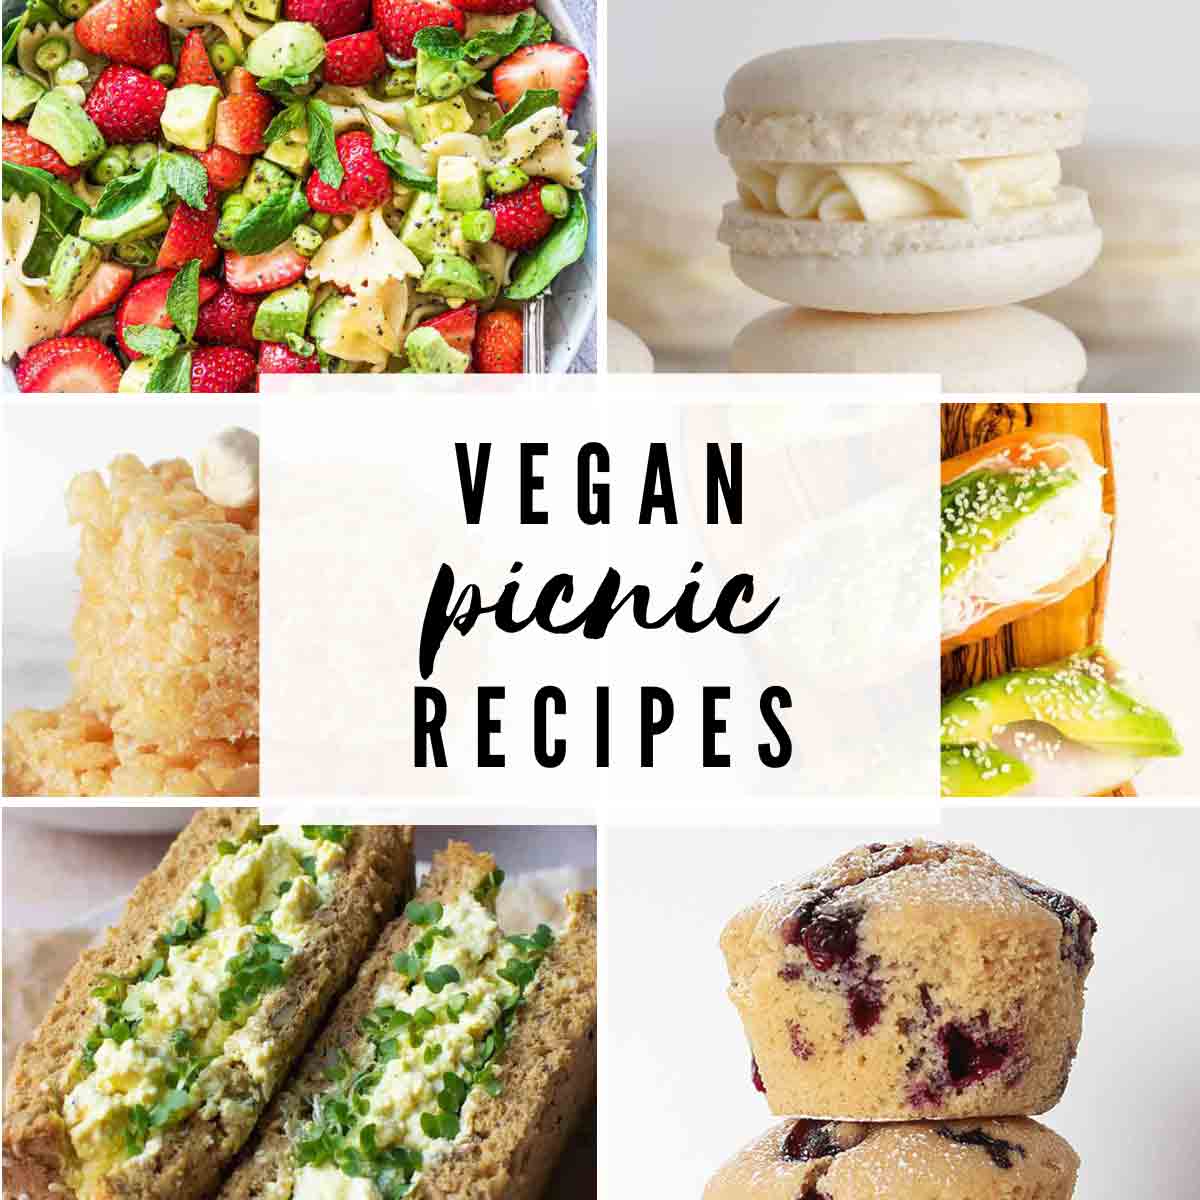 6 Food Images With Text Overlay That Reads Vegan Picnic Recipes